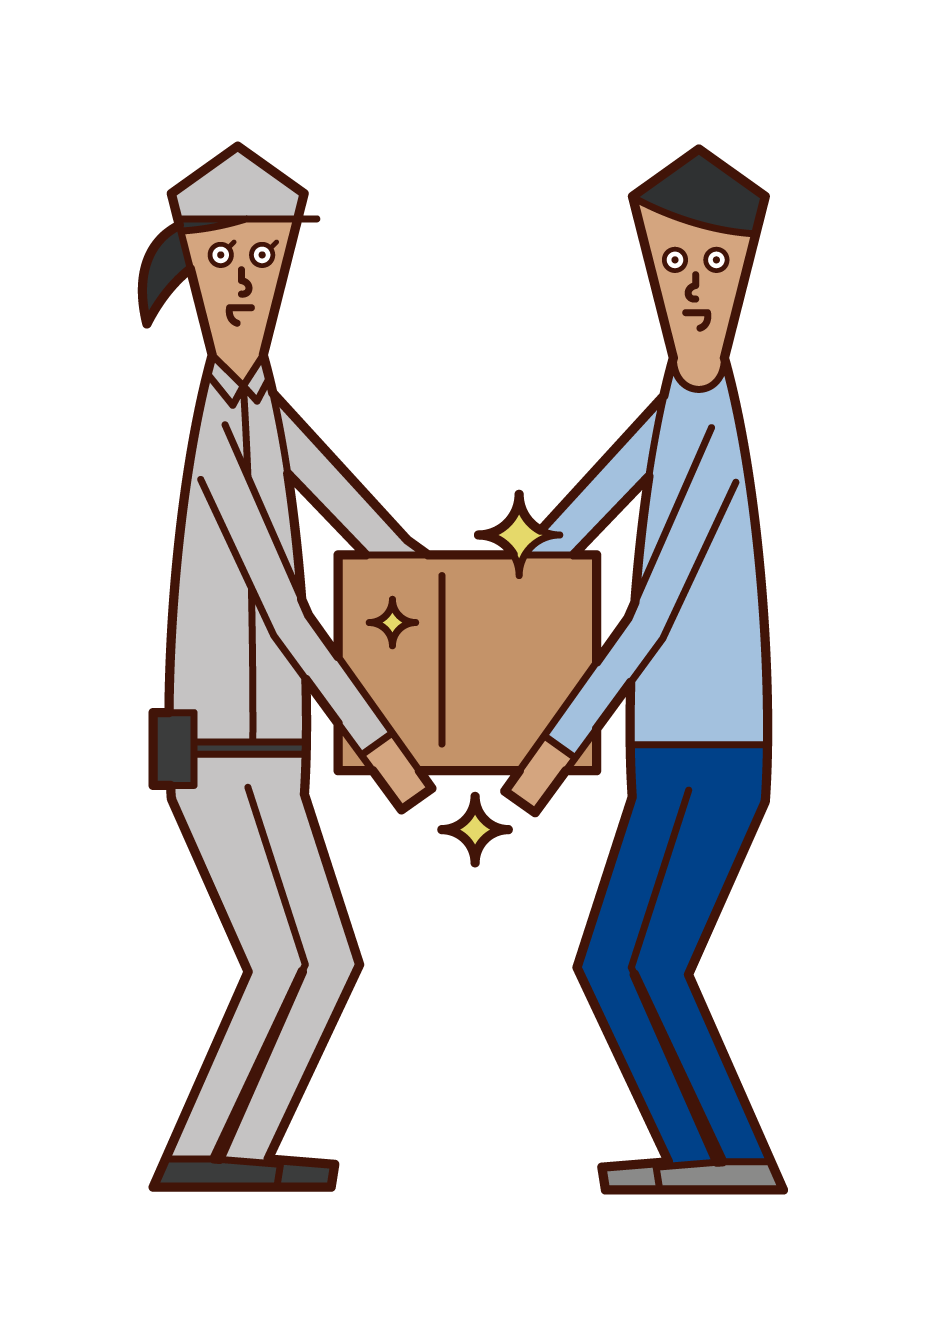 Illustration of a delivery driver (woman) handing over a package